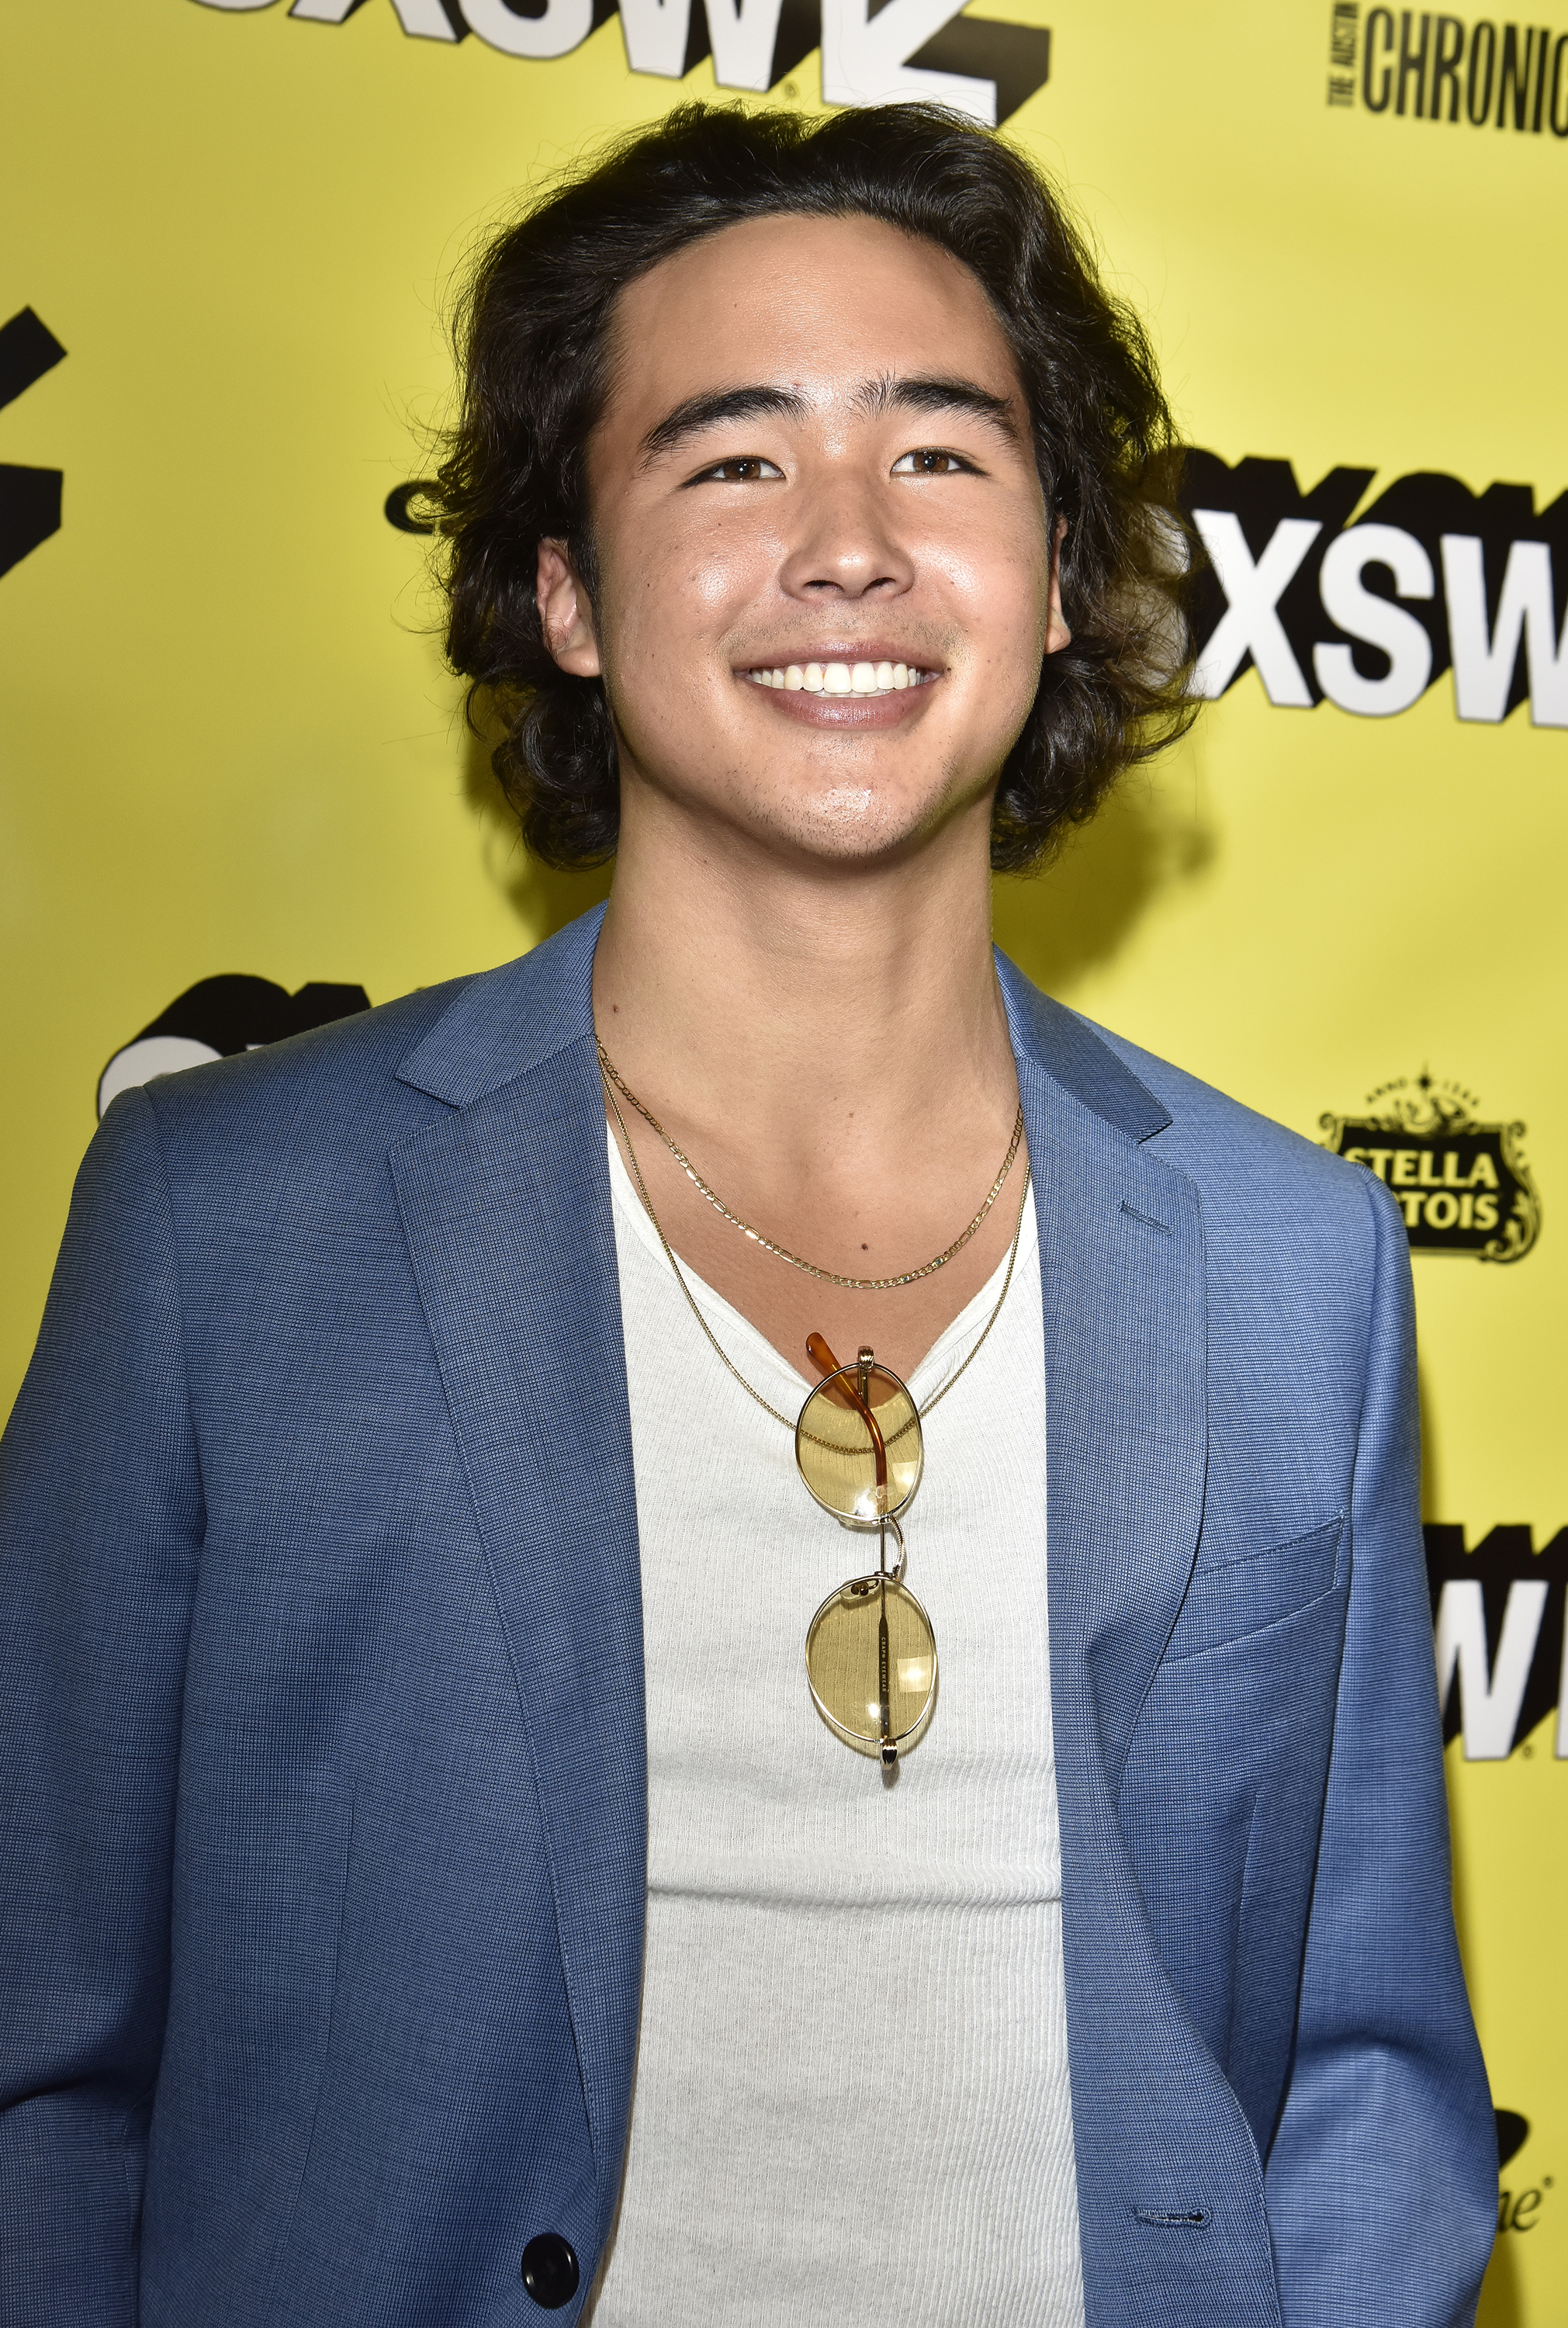 Nico Hiraga poses at the premiere of "Booksmart" during the 2019 SXSW Conference And Festival at the Paramount Theatre on March 10, 2019, in Austin, Texas | Source: Getty Images